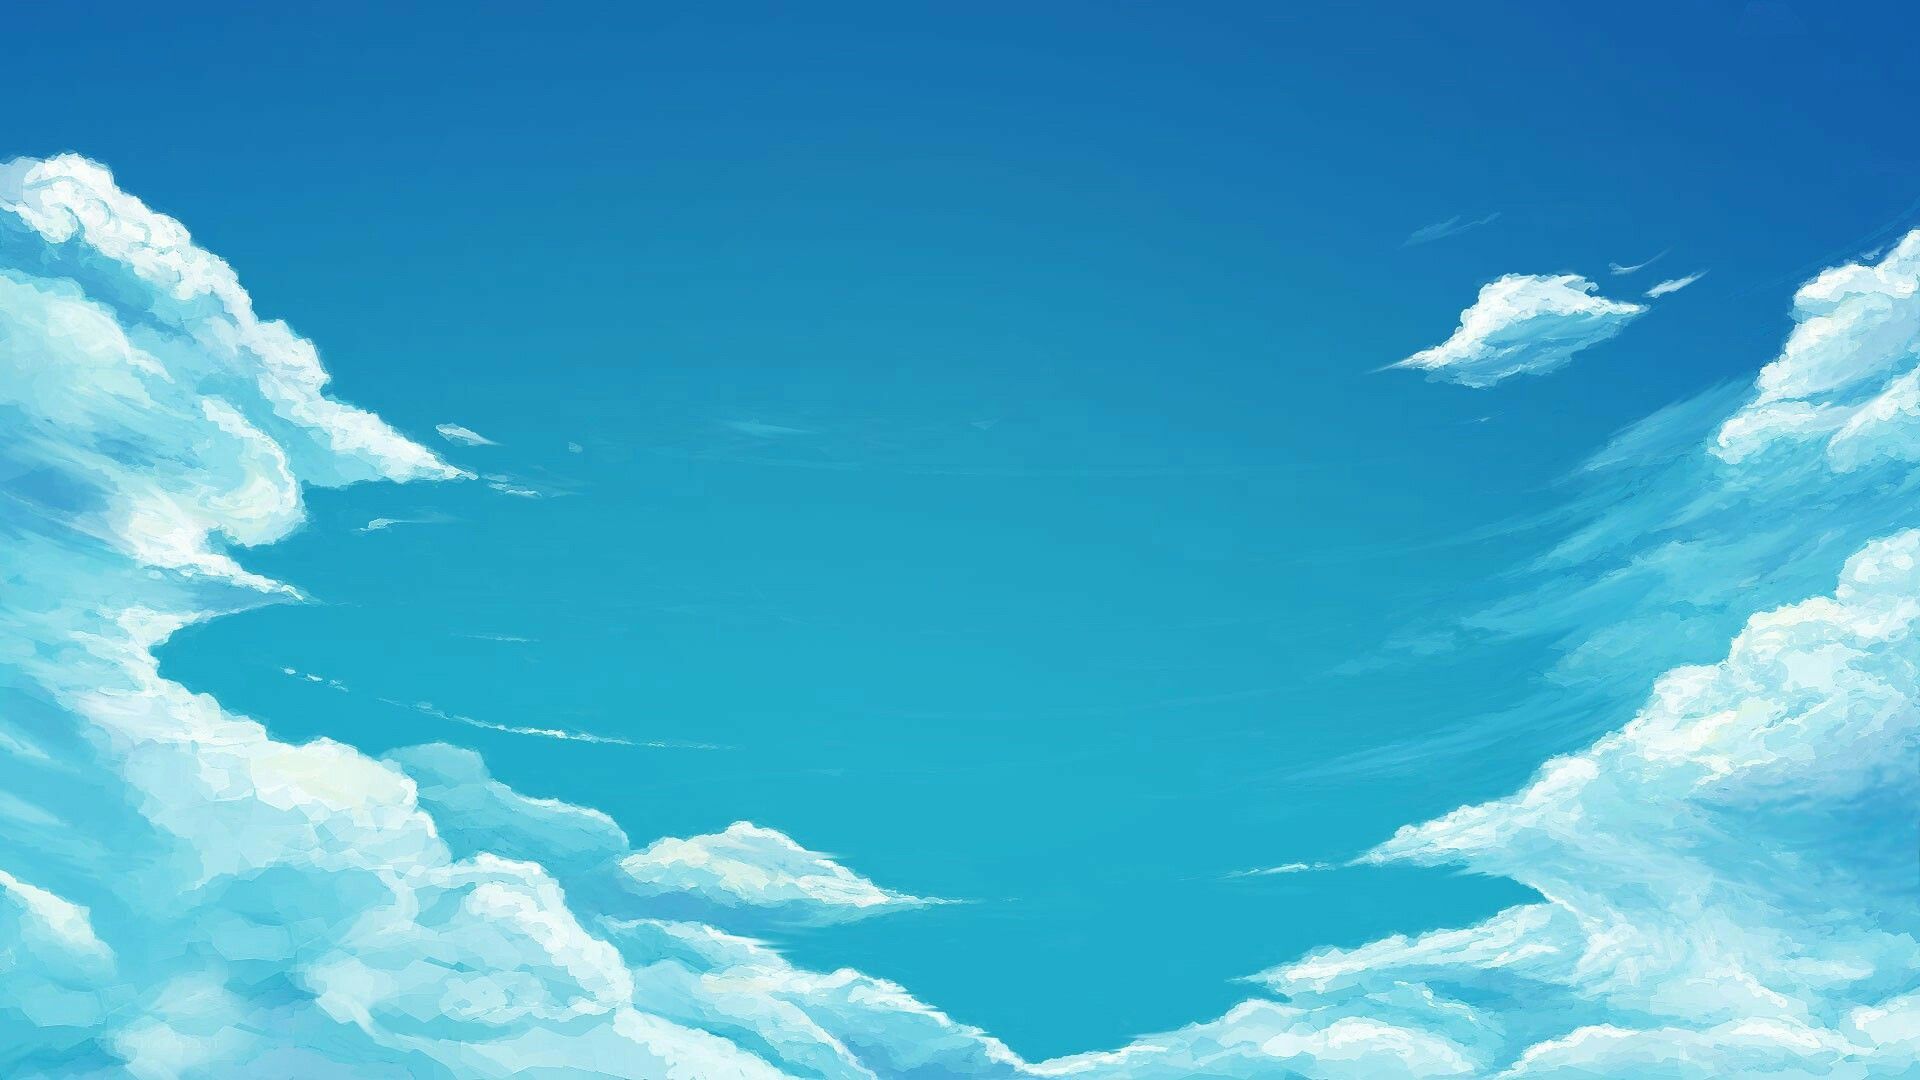 Anime Girl Is Standing On Rock Under Clouds Blue Sky In Rainbow Background  HD Anime Girl Wallpapers | HD Wallpapers | ID #105211